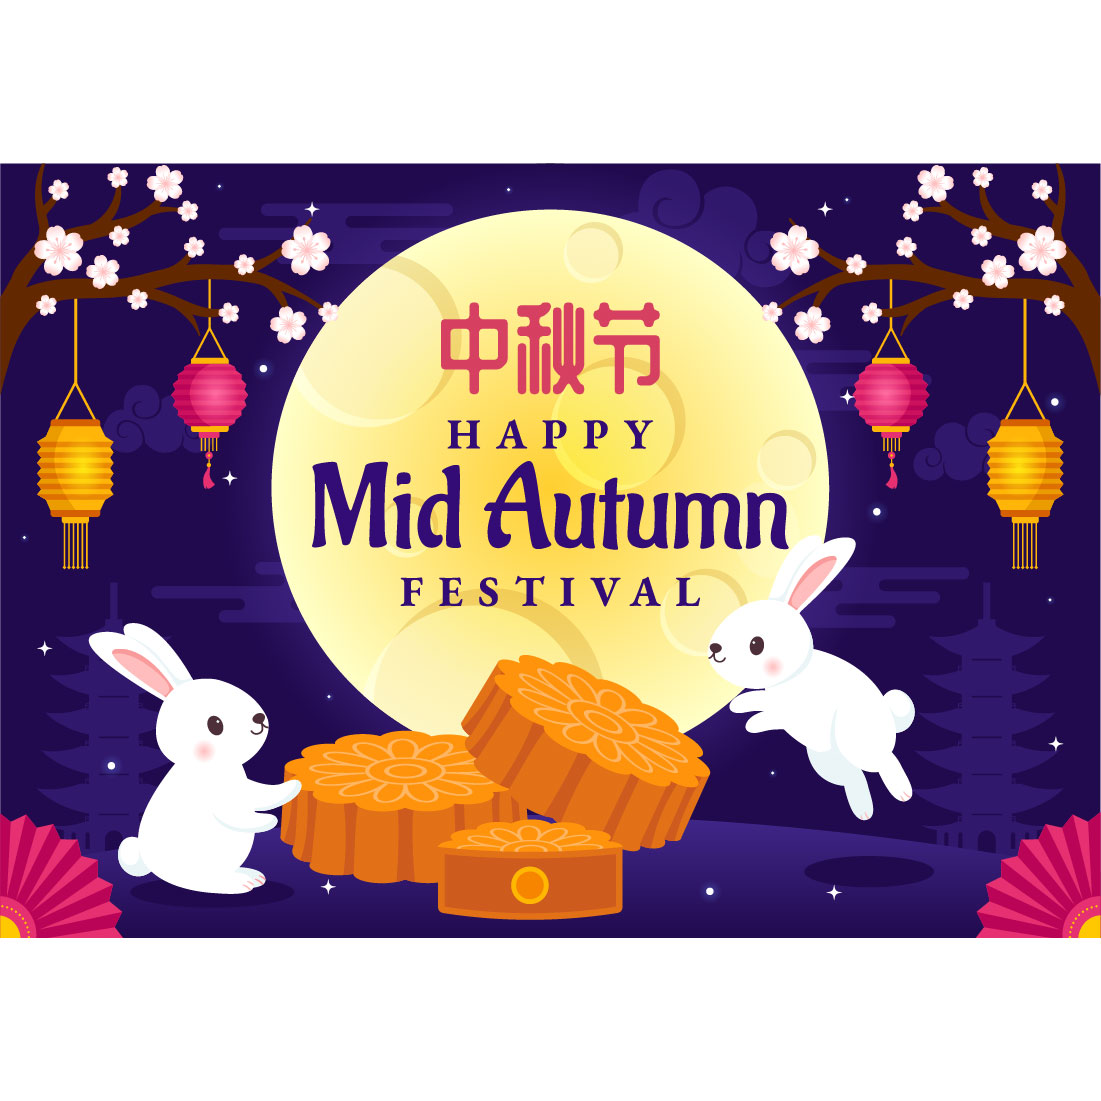 11 Happy Mid Autumn Festival Illustration preview image.